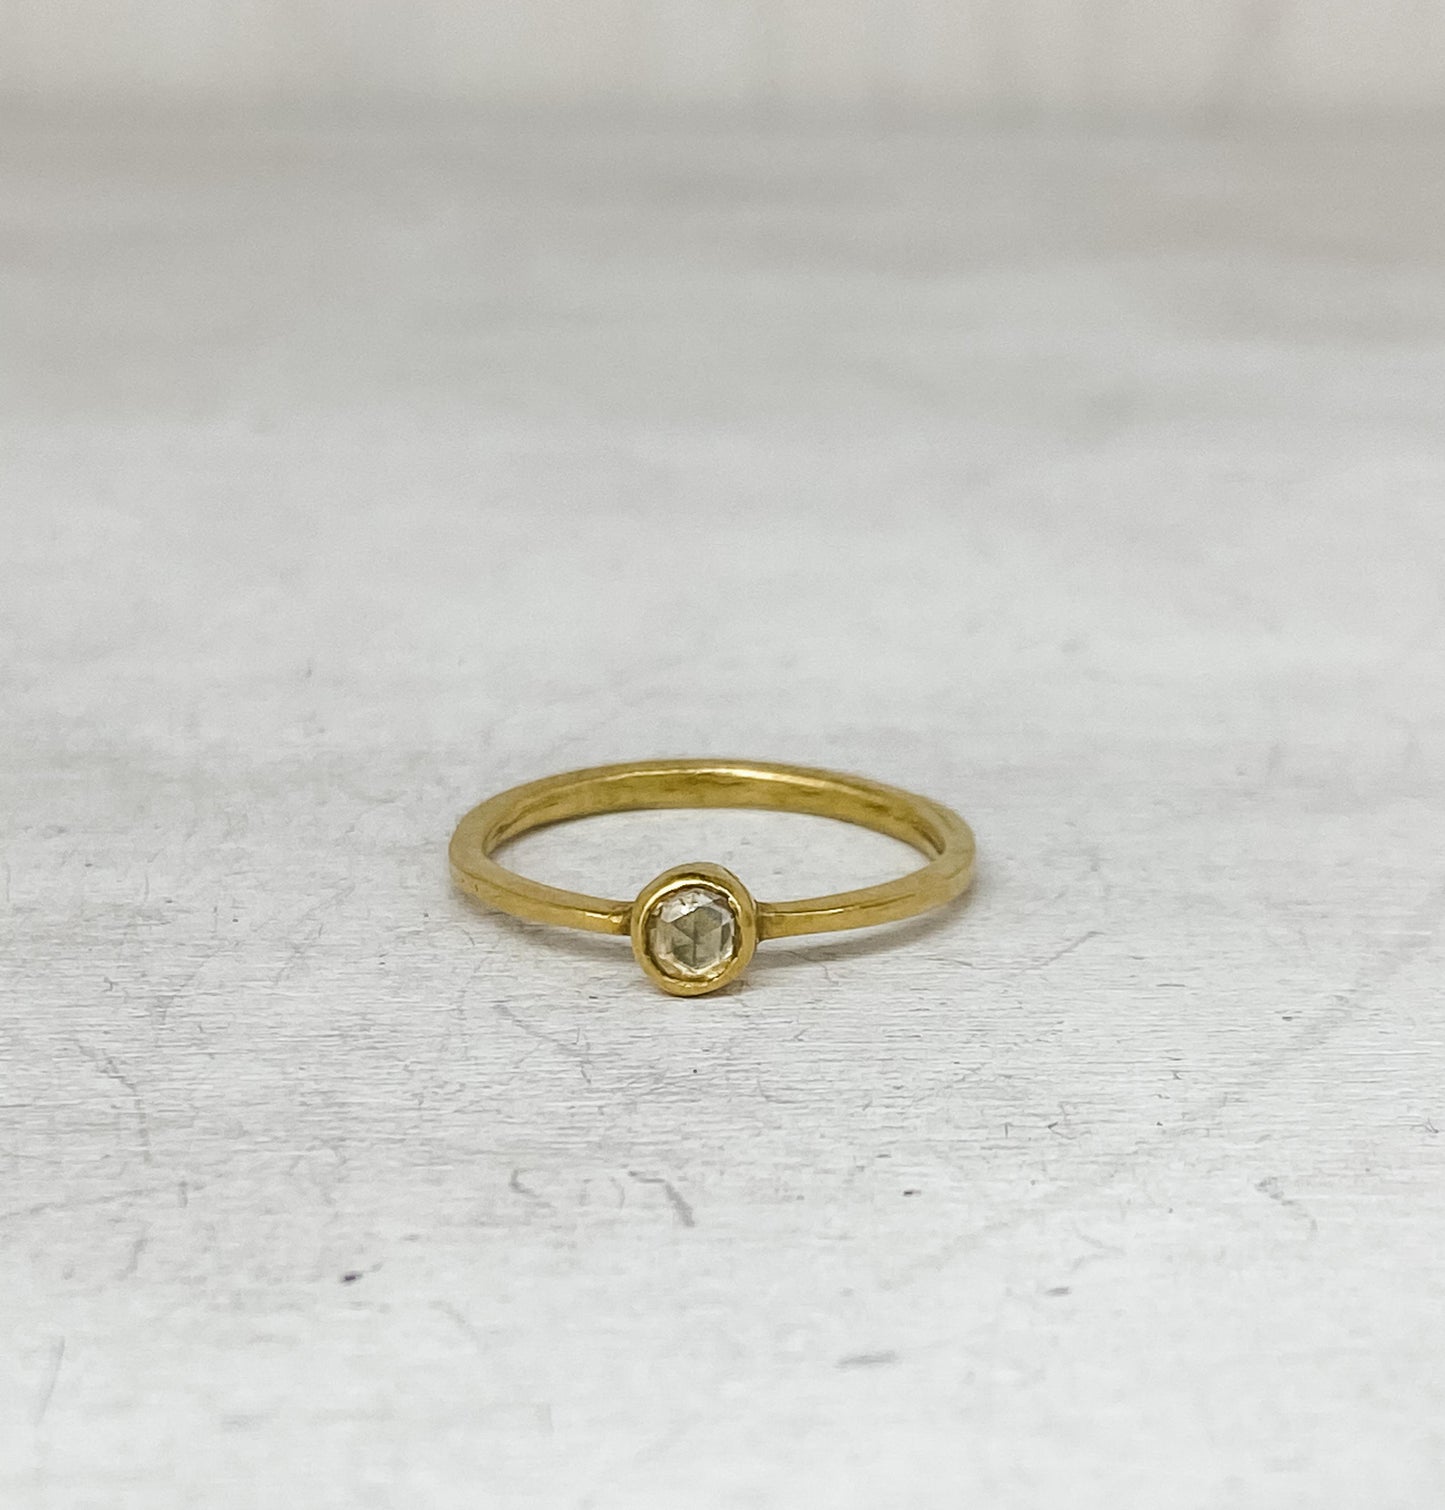 22k Gold Ring with Rose Cut Diamond